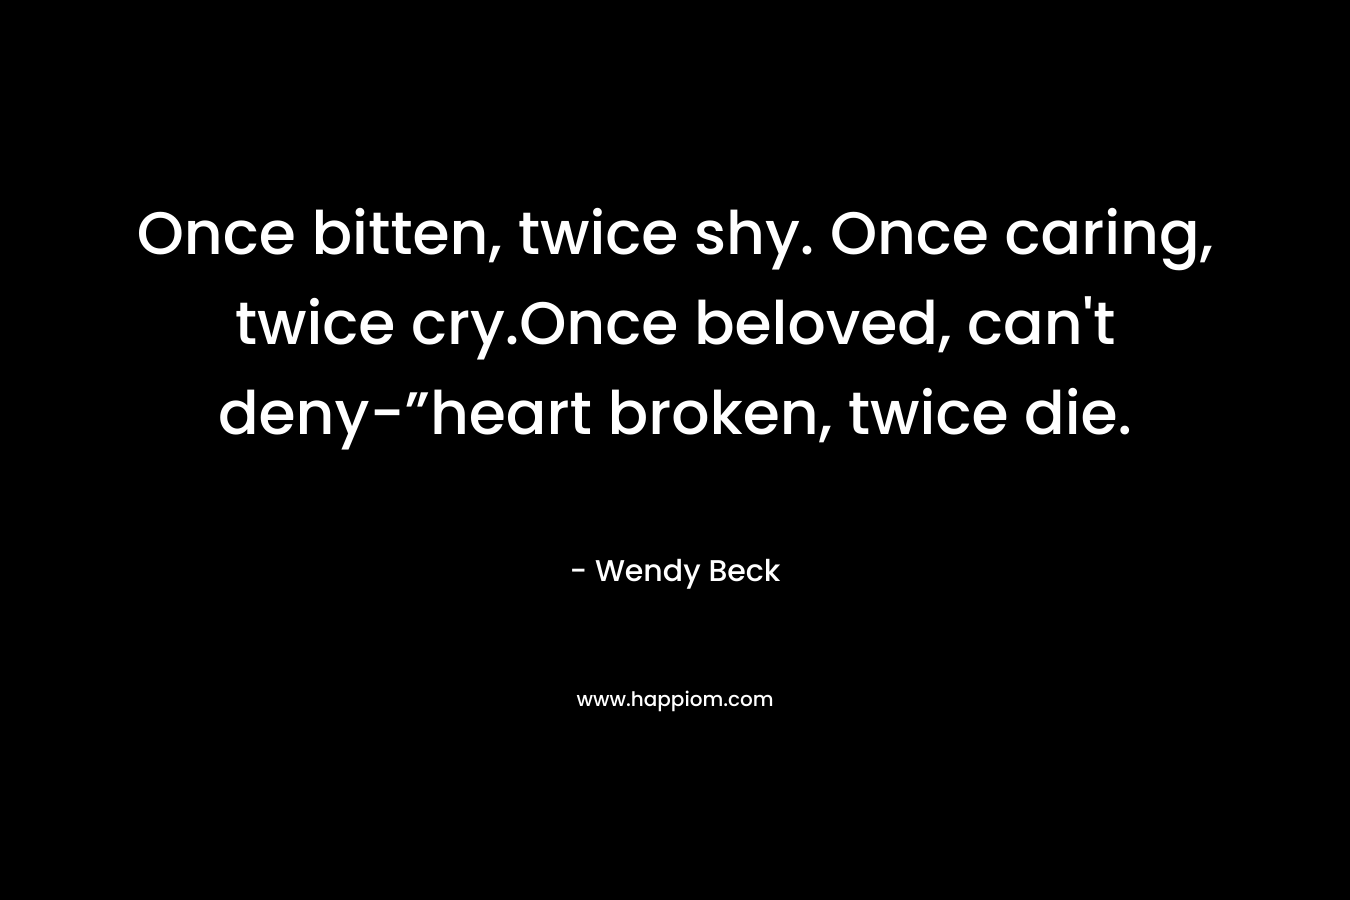 Once bitten, twice shy. Once caring, twice cry.Once beloved, can’t deny-”heart broken, twice die. – Wendy Beck